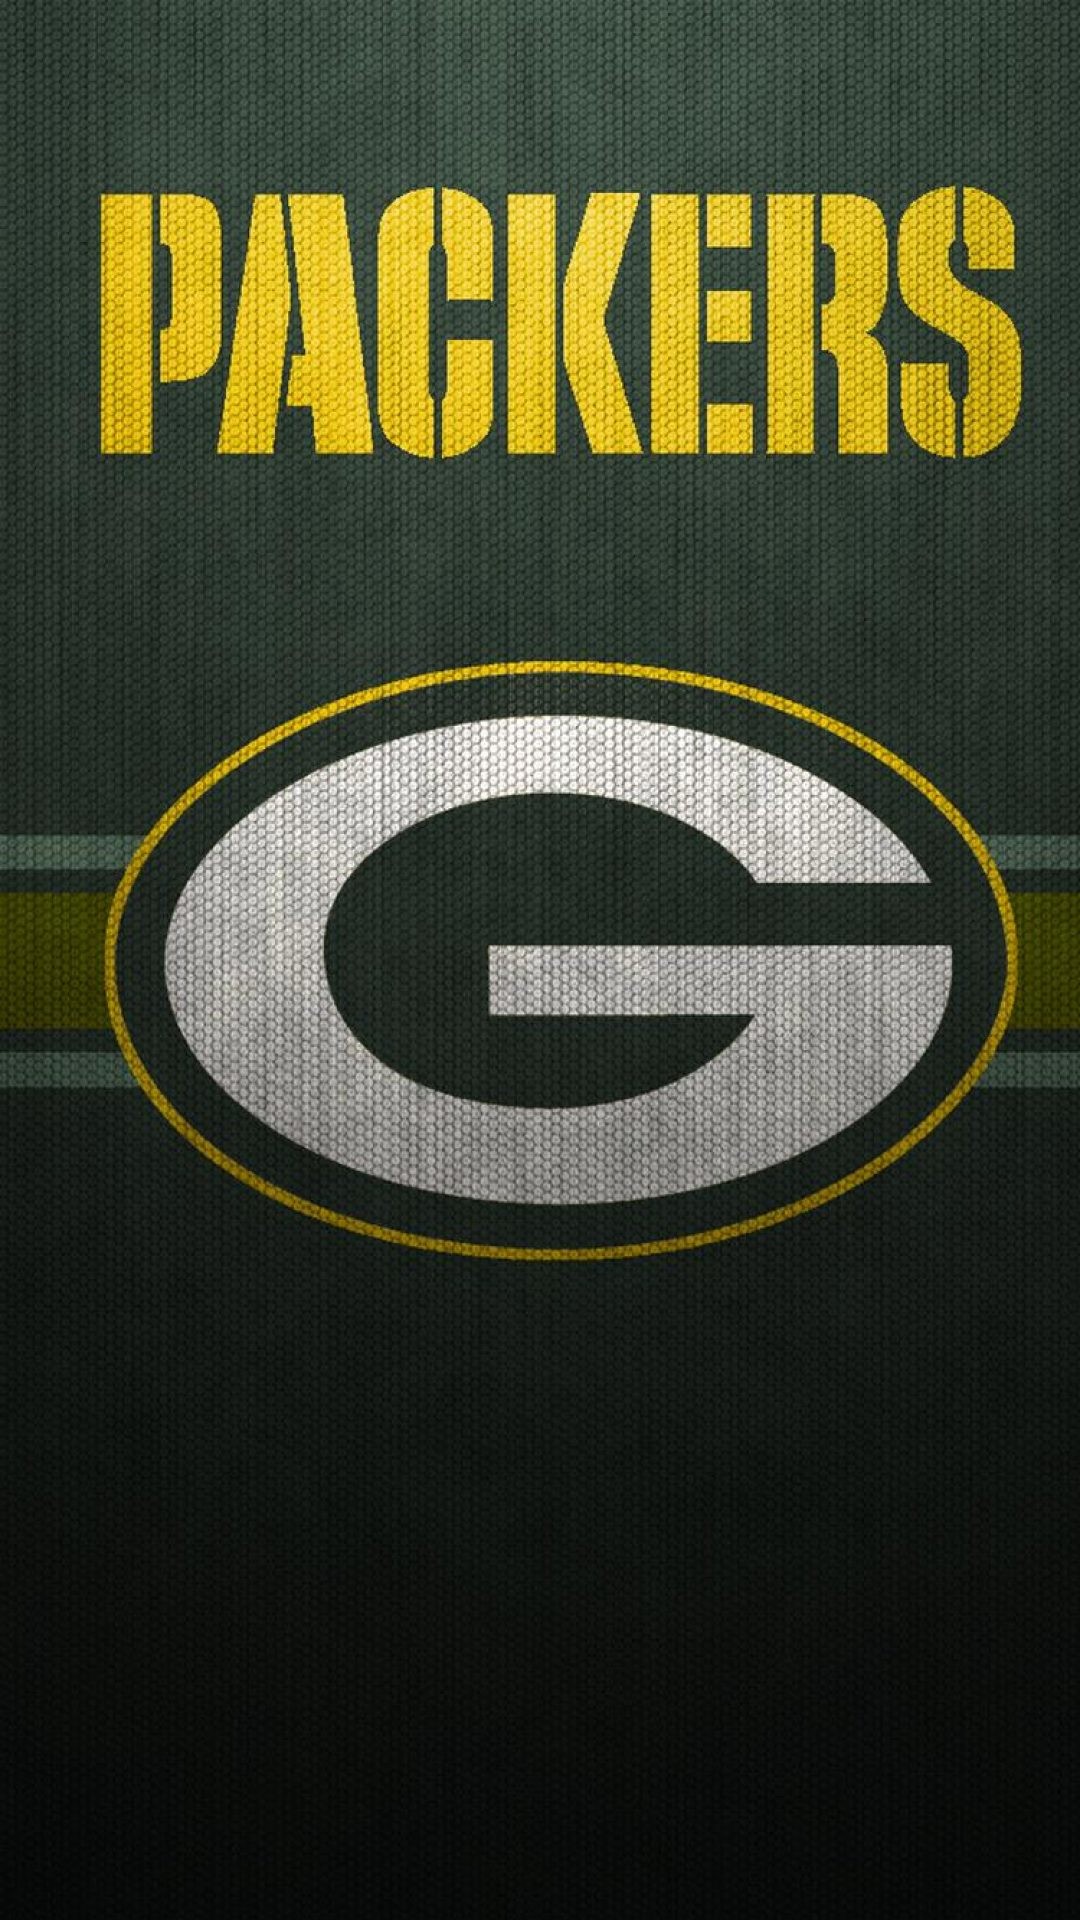 1080x1920 green bay packers iphone wallpaper